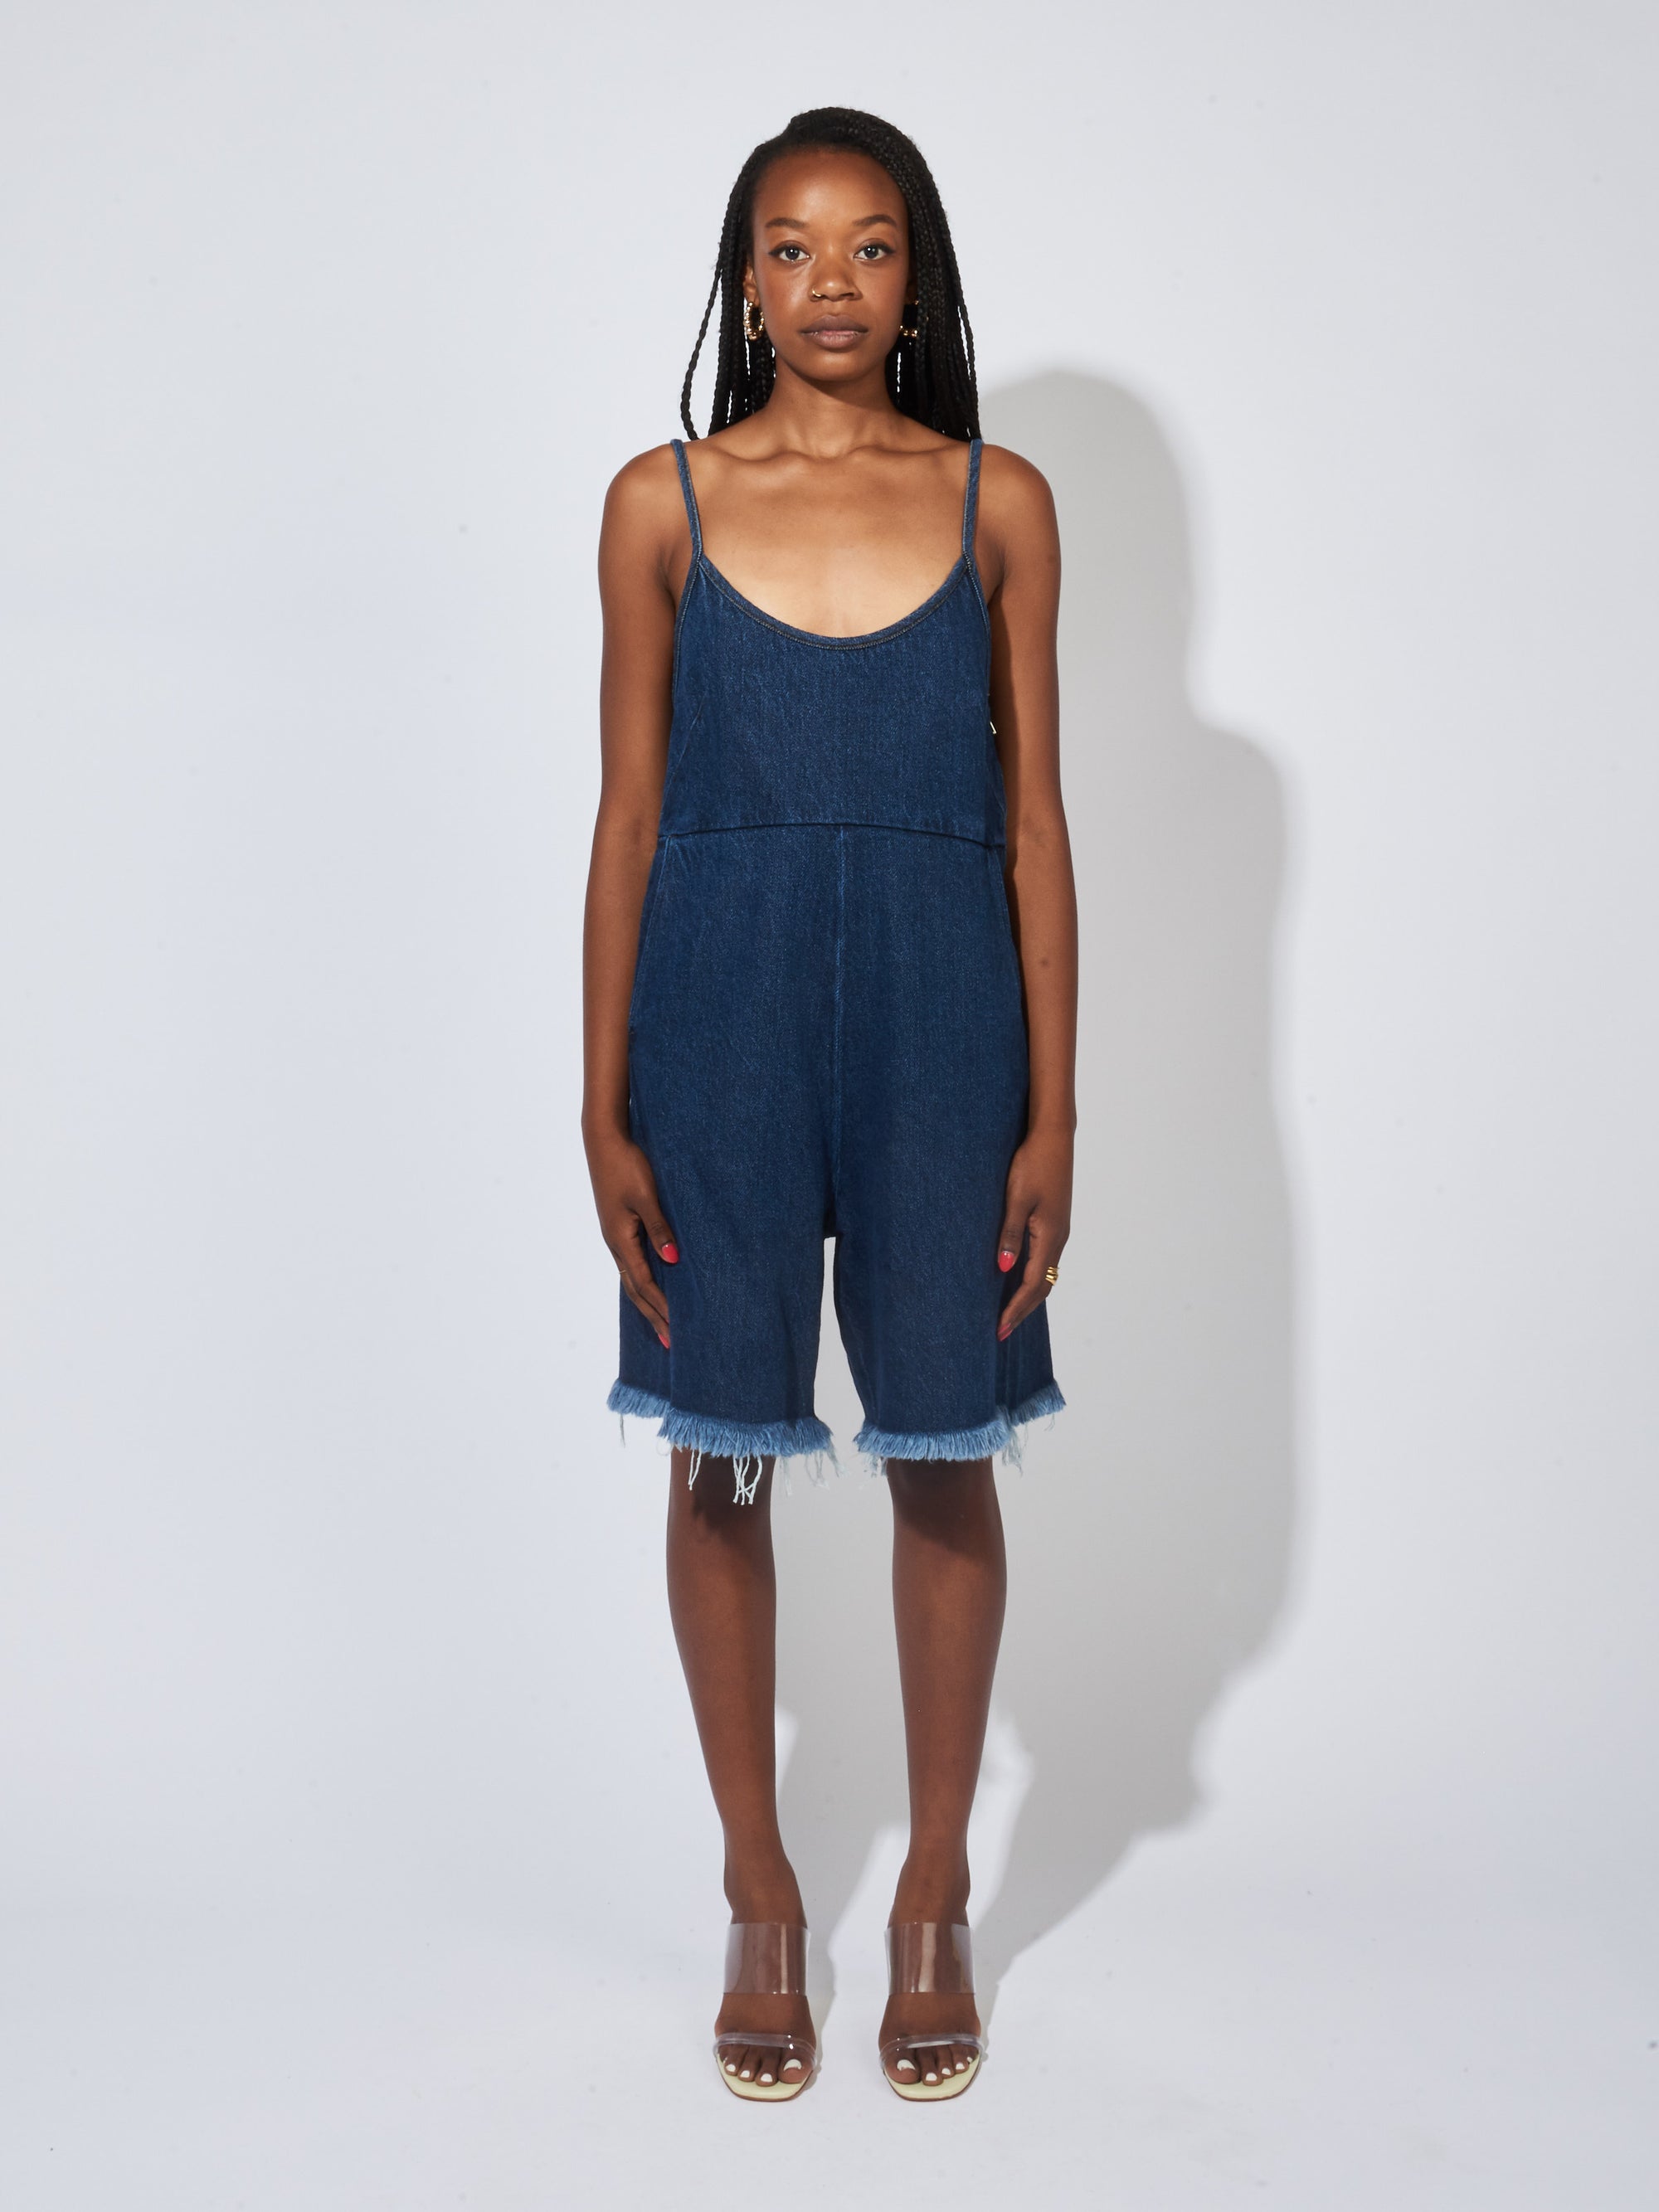 Jumpsuits & Co-ords | Knee Length Jumpsuit With Pockets, Elastic Waist |  Freeup